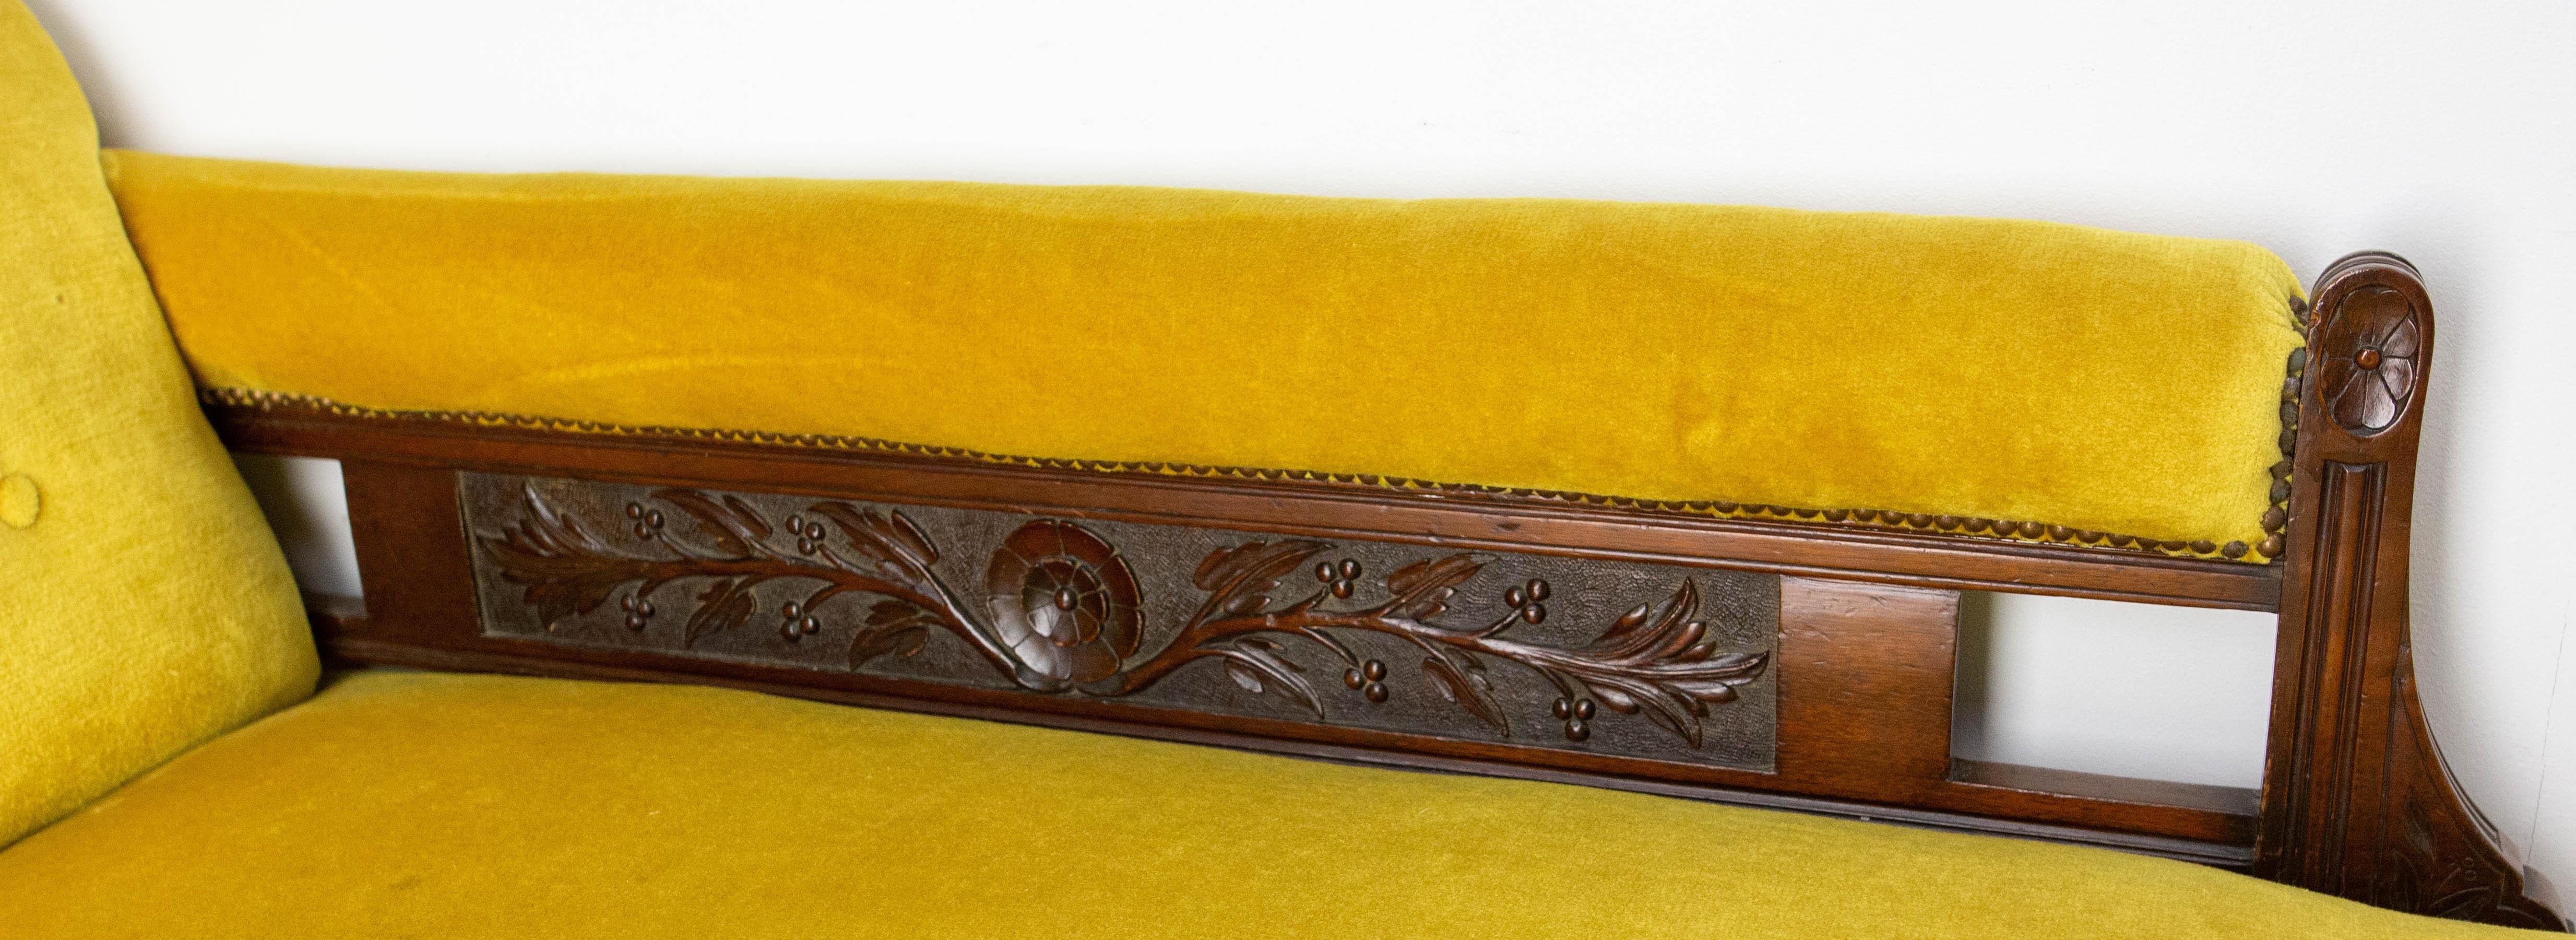 French Louis Philippe Bench Seat Wood Sofa or Banquette French 19th Midcentury For Sale 4